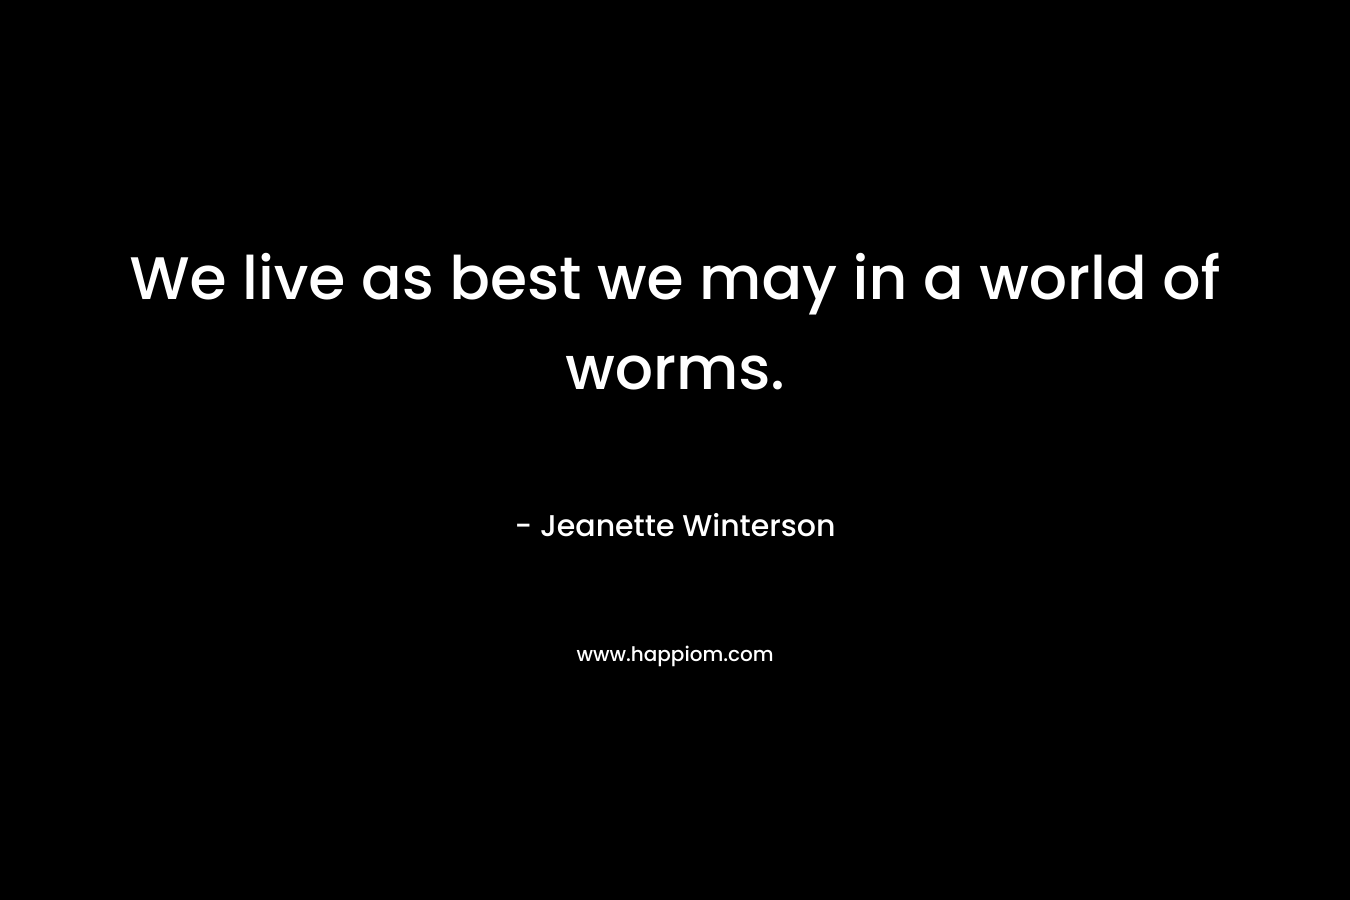 We live as best we may in a world of worms. – Jeanette Winterson